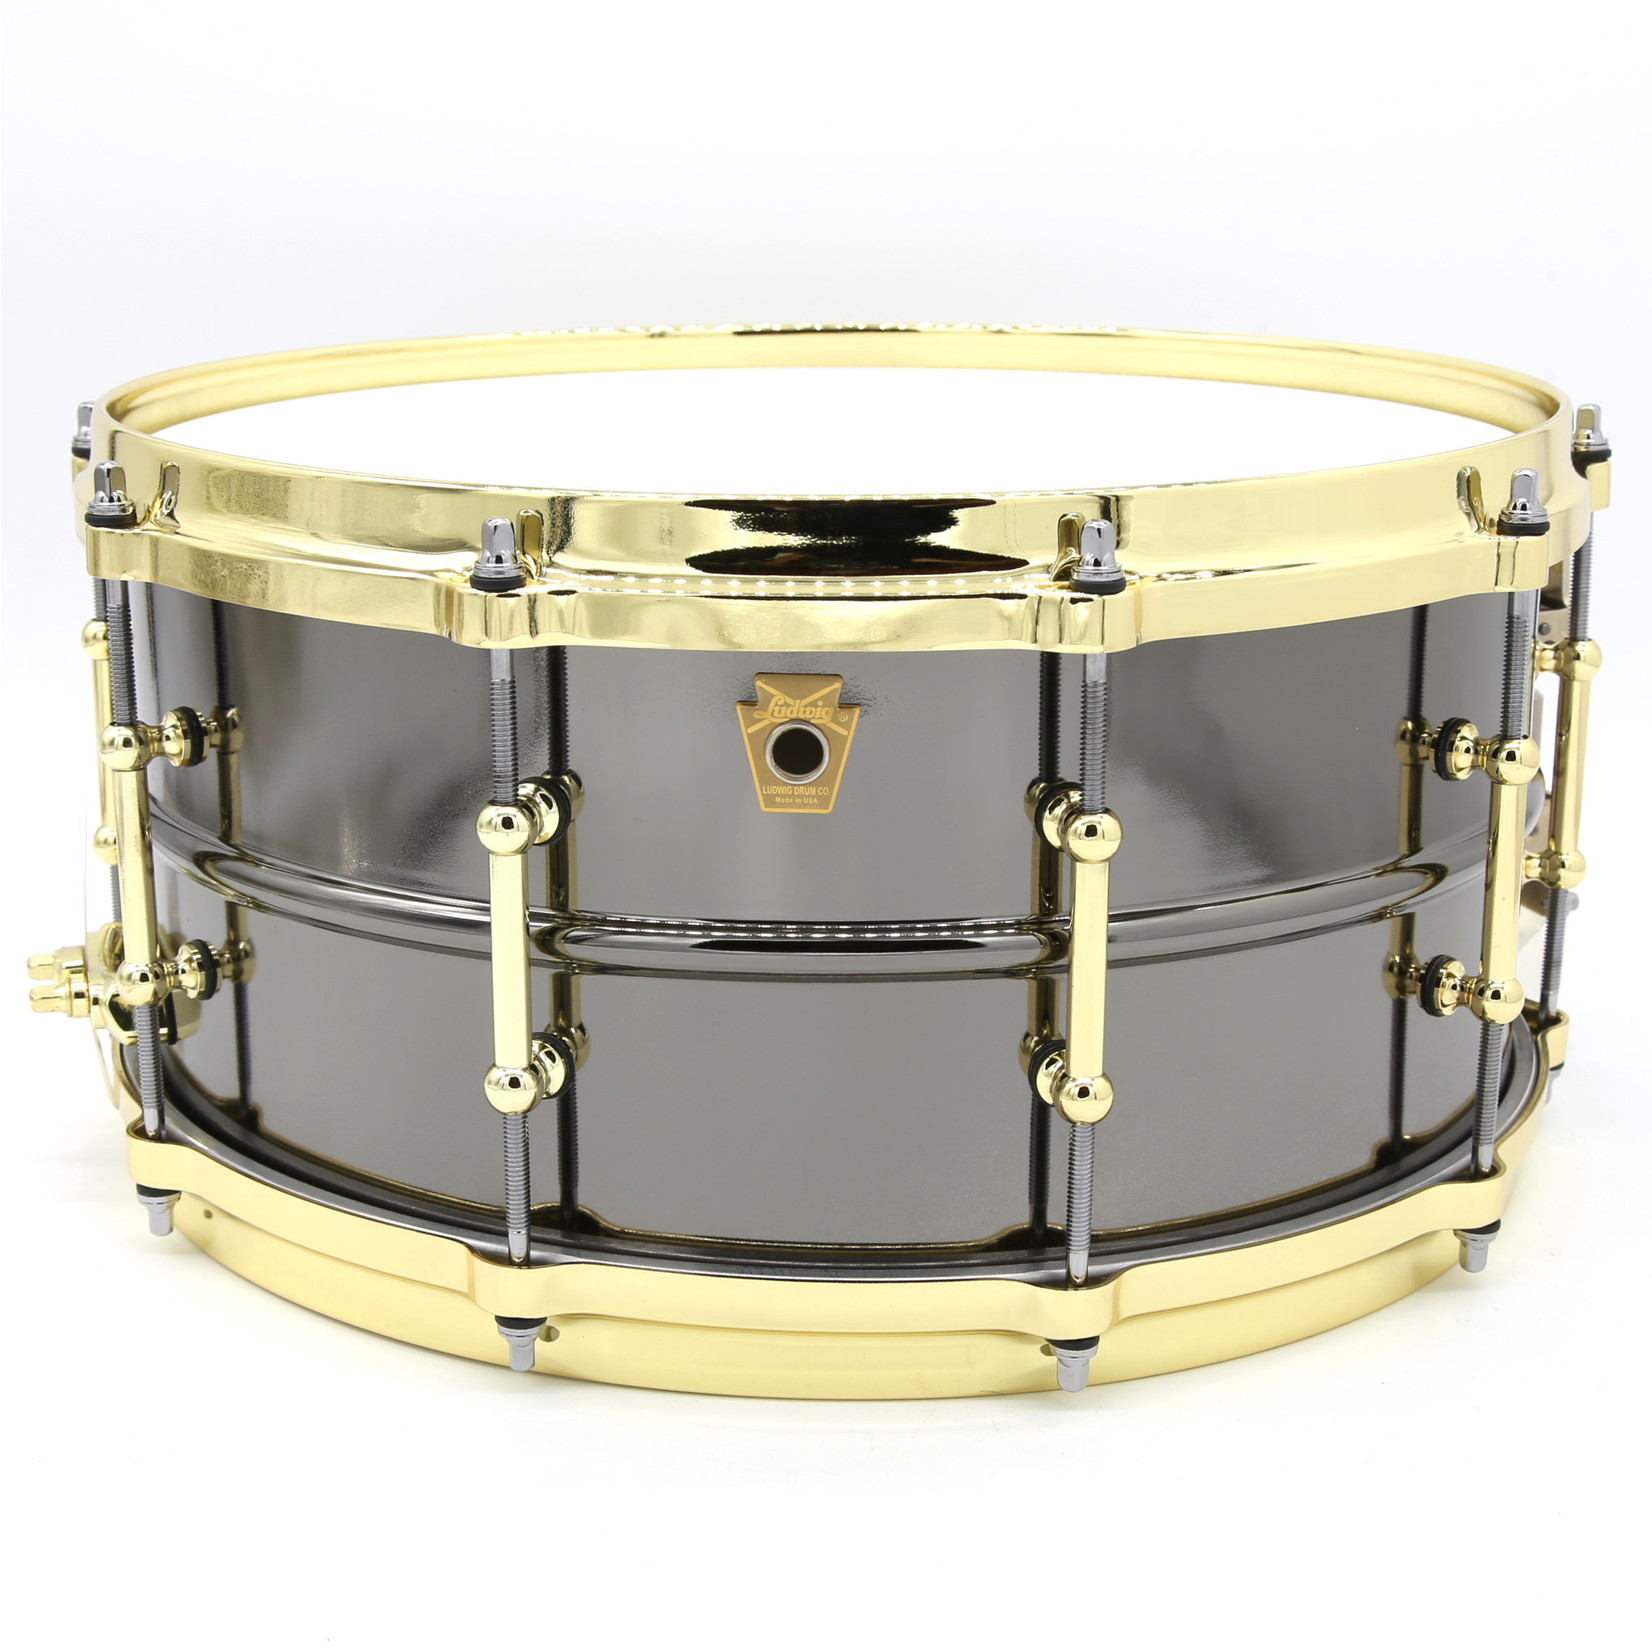 Ludwig Drums Black Beauty Brass Snare Drum, 10 Lugs - 6.5x14